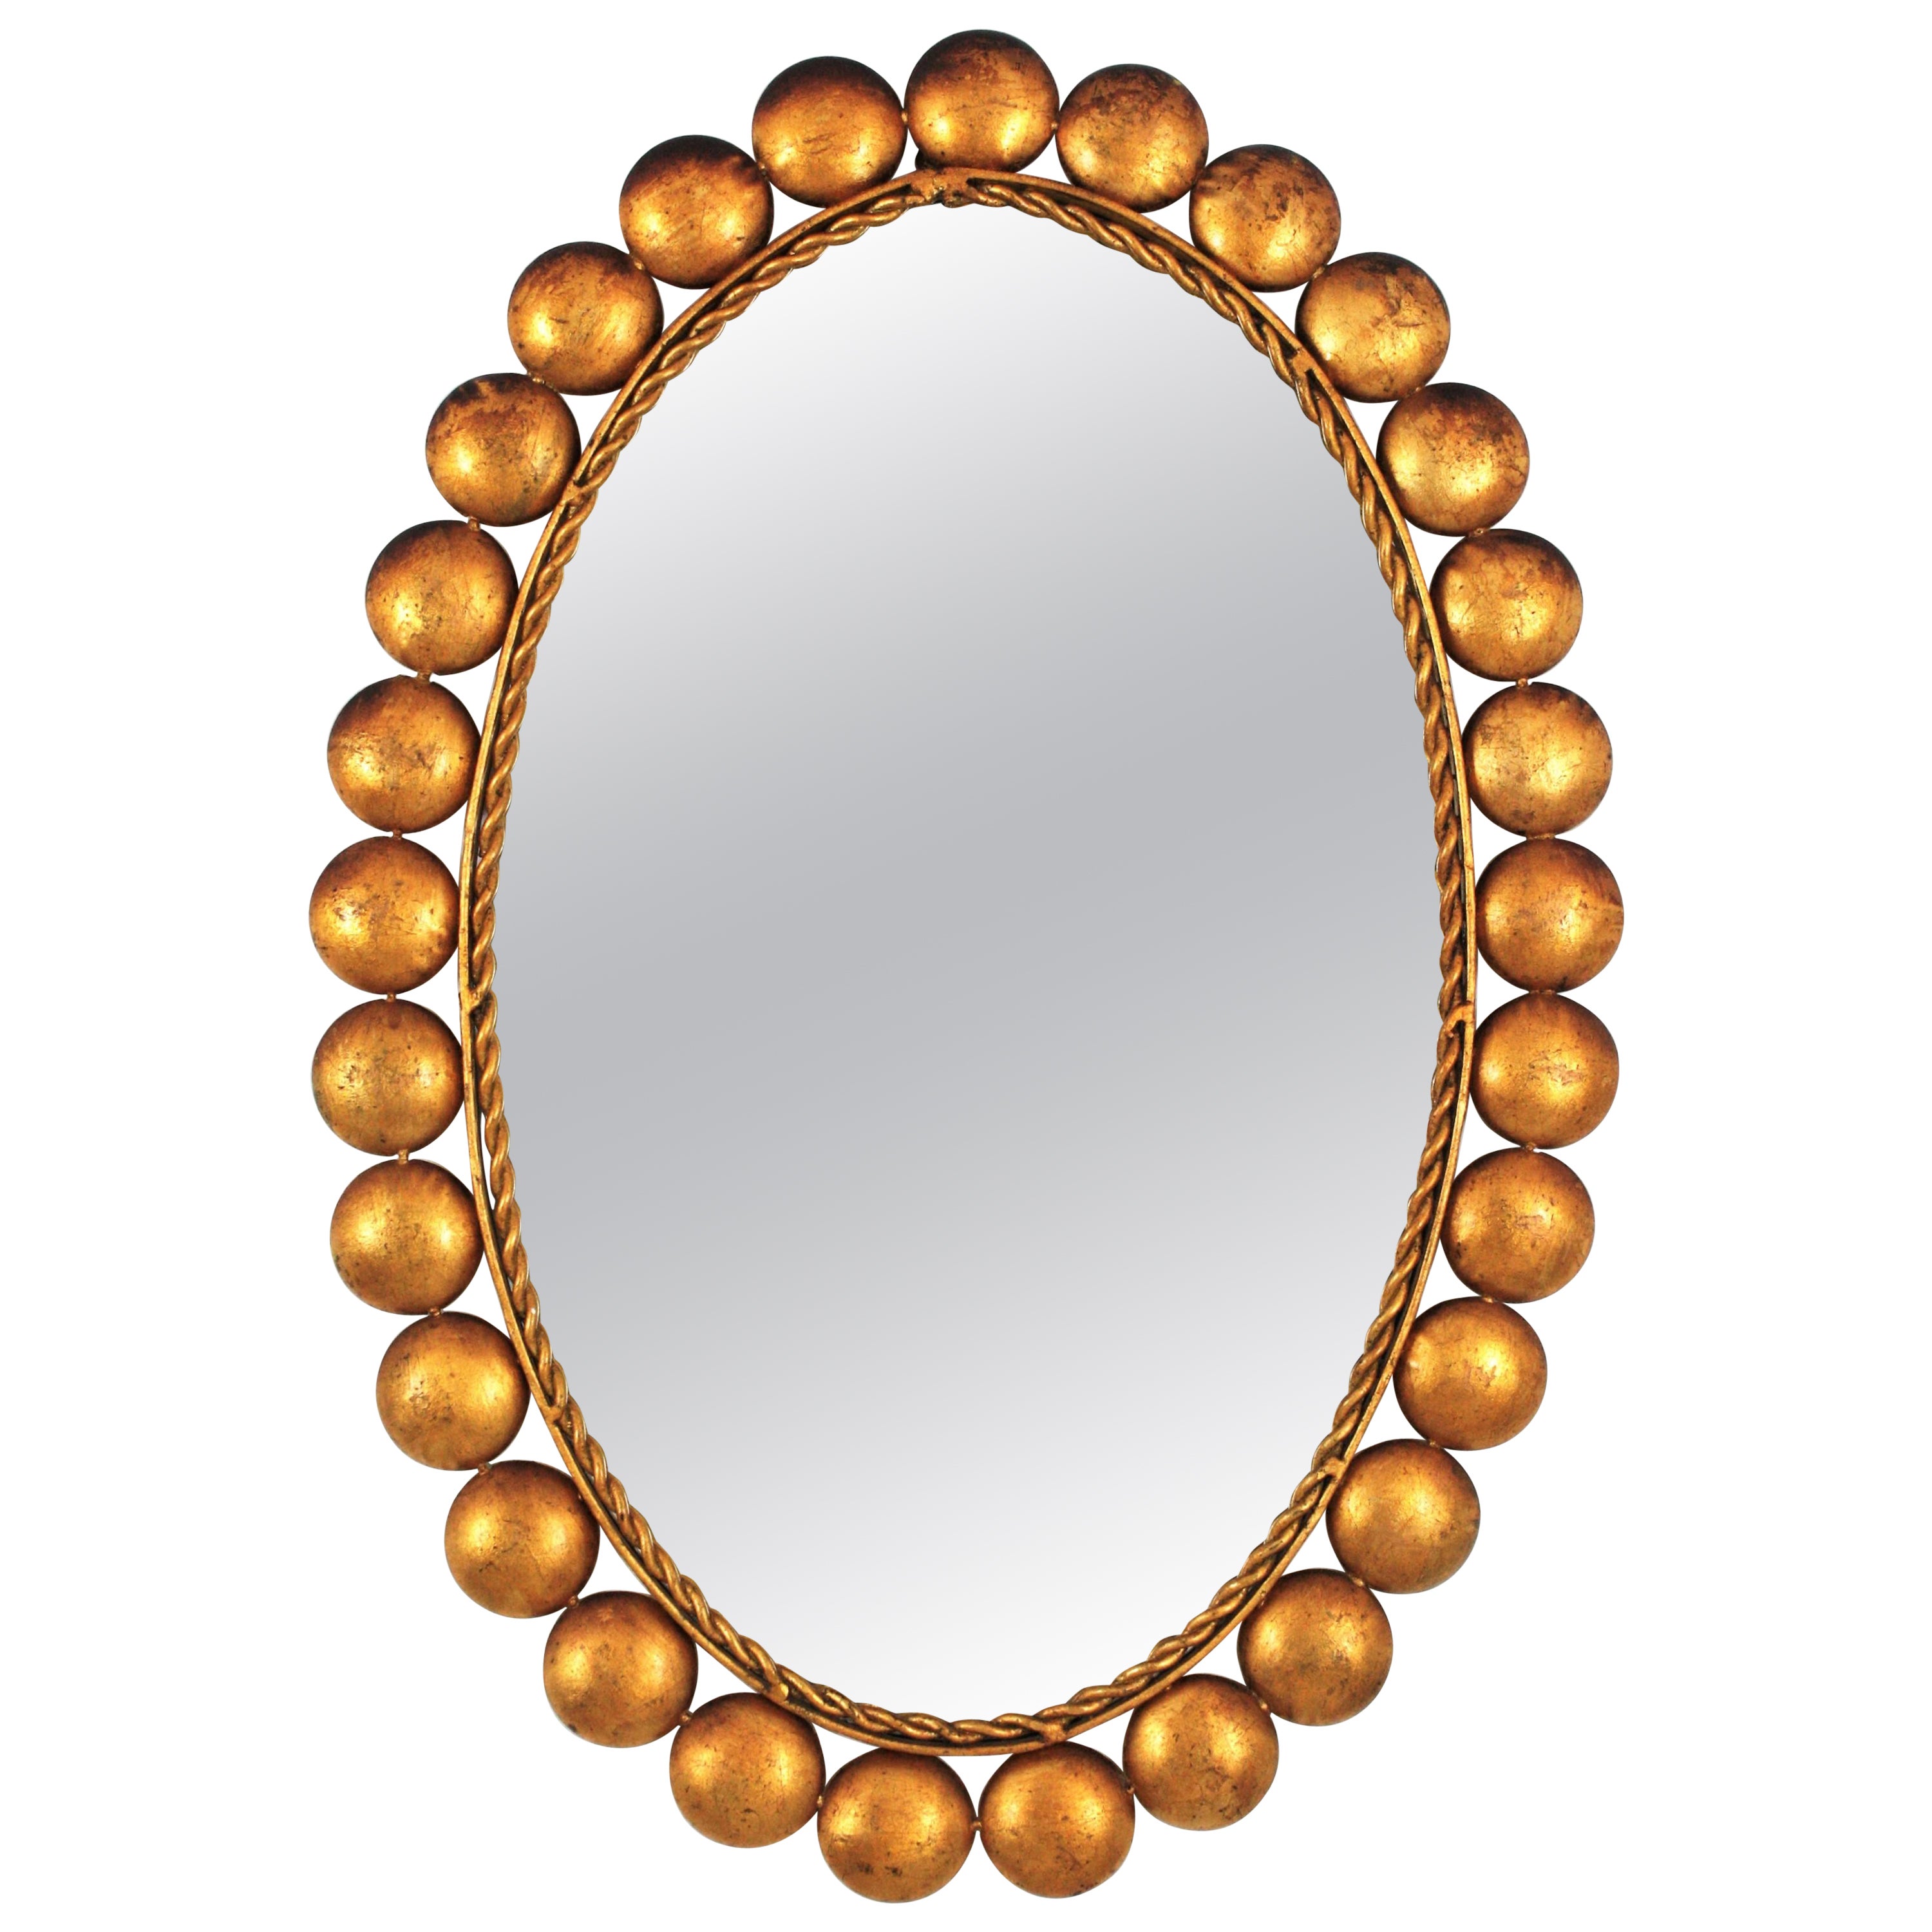 Spanish Oval Mirror in Gilt Iron with Balls Frame